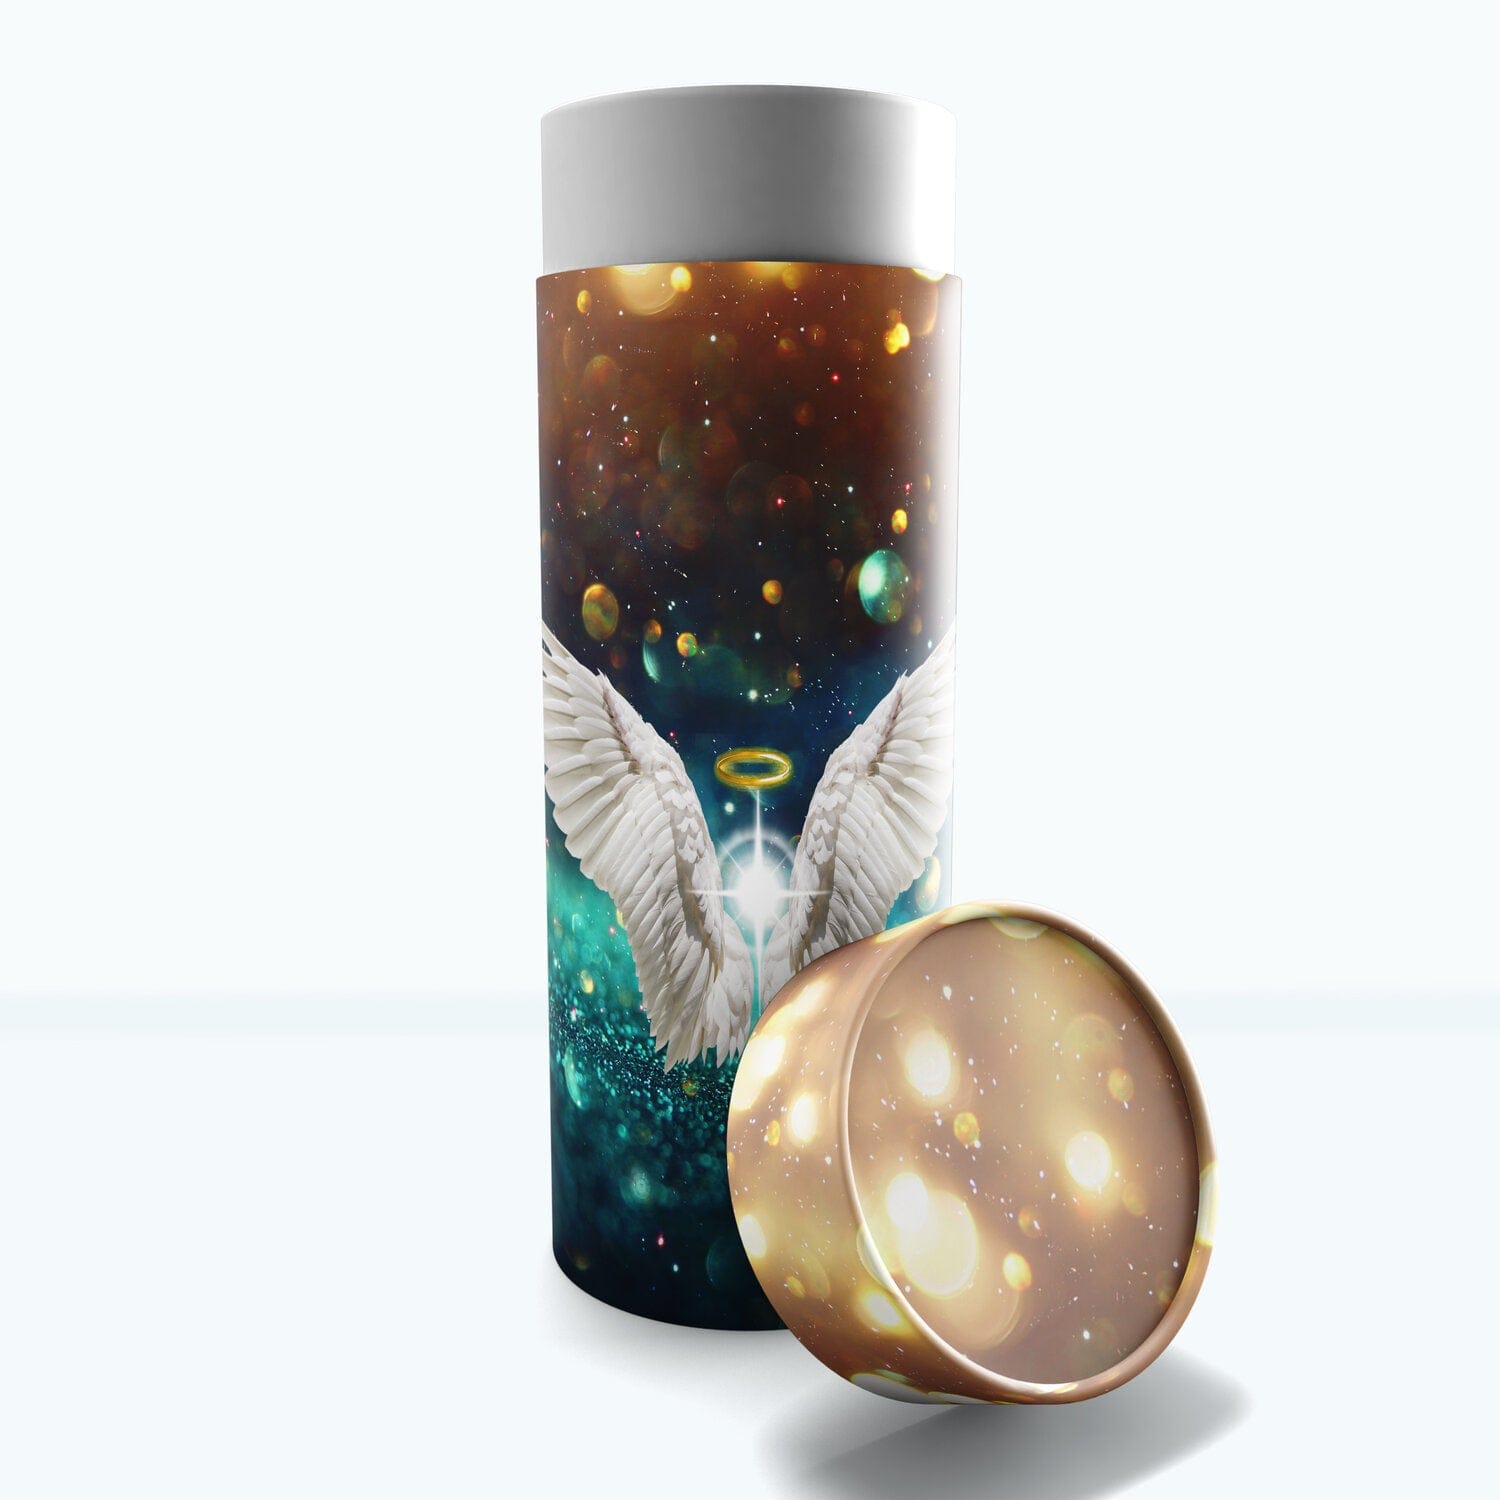 Commemorative Cremation Urns Small Guardian Angel (Teal) - Biodegradable & Eco Friendly Burial or Scattering Urn / Tube